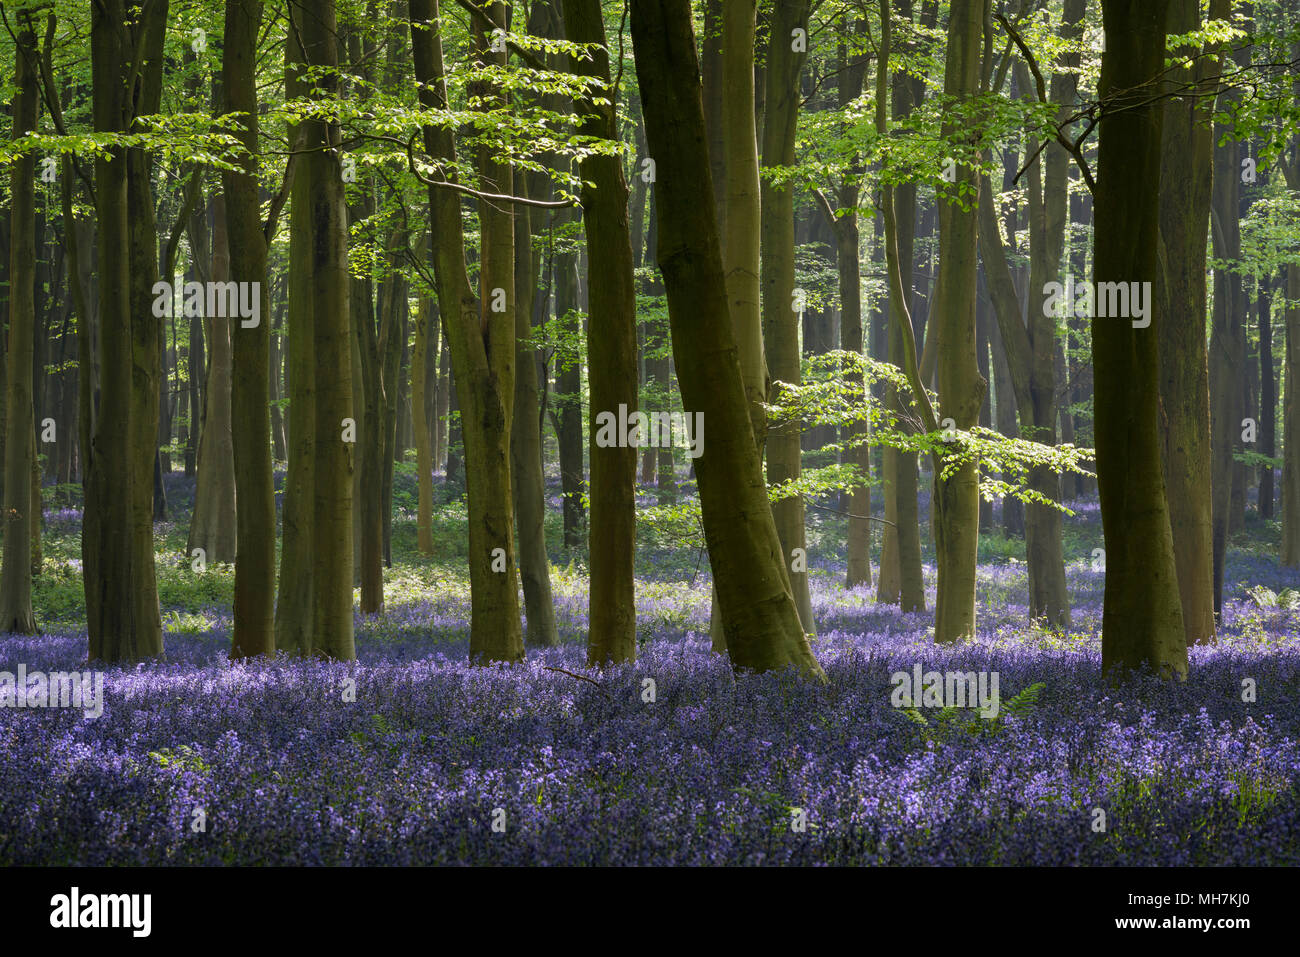 Dappled sunlight in a woodland full of Beech trees and Bluebells (Hyacinthoides non-scripta) near to Micheldever in Hampshire, England. Stock Photo